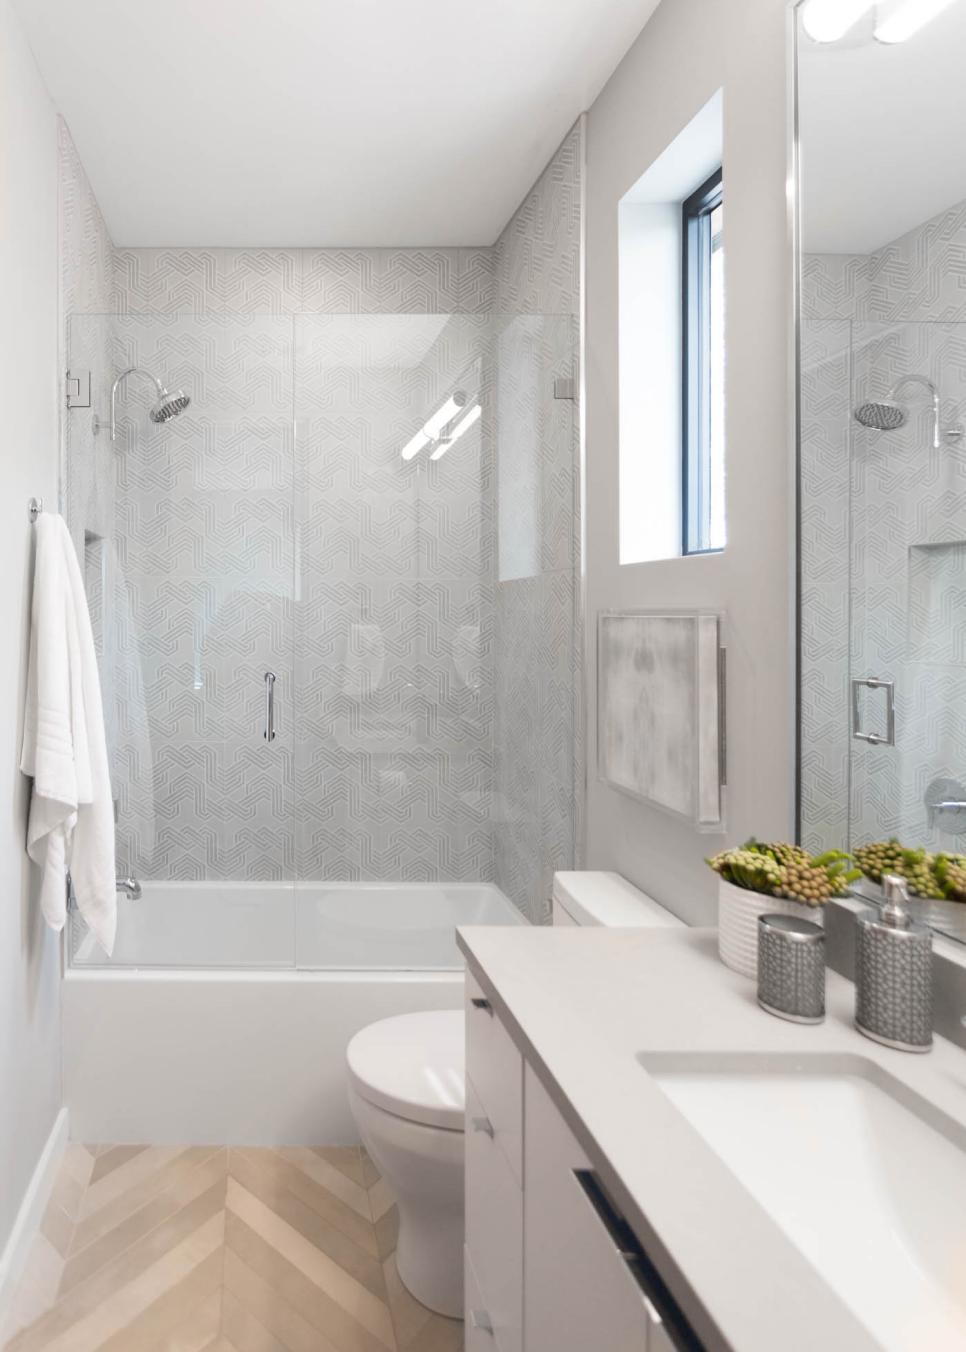 Light and Bright Transitional Bathroom With Glass Enclosed Shower | HGTV